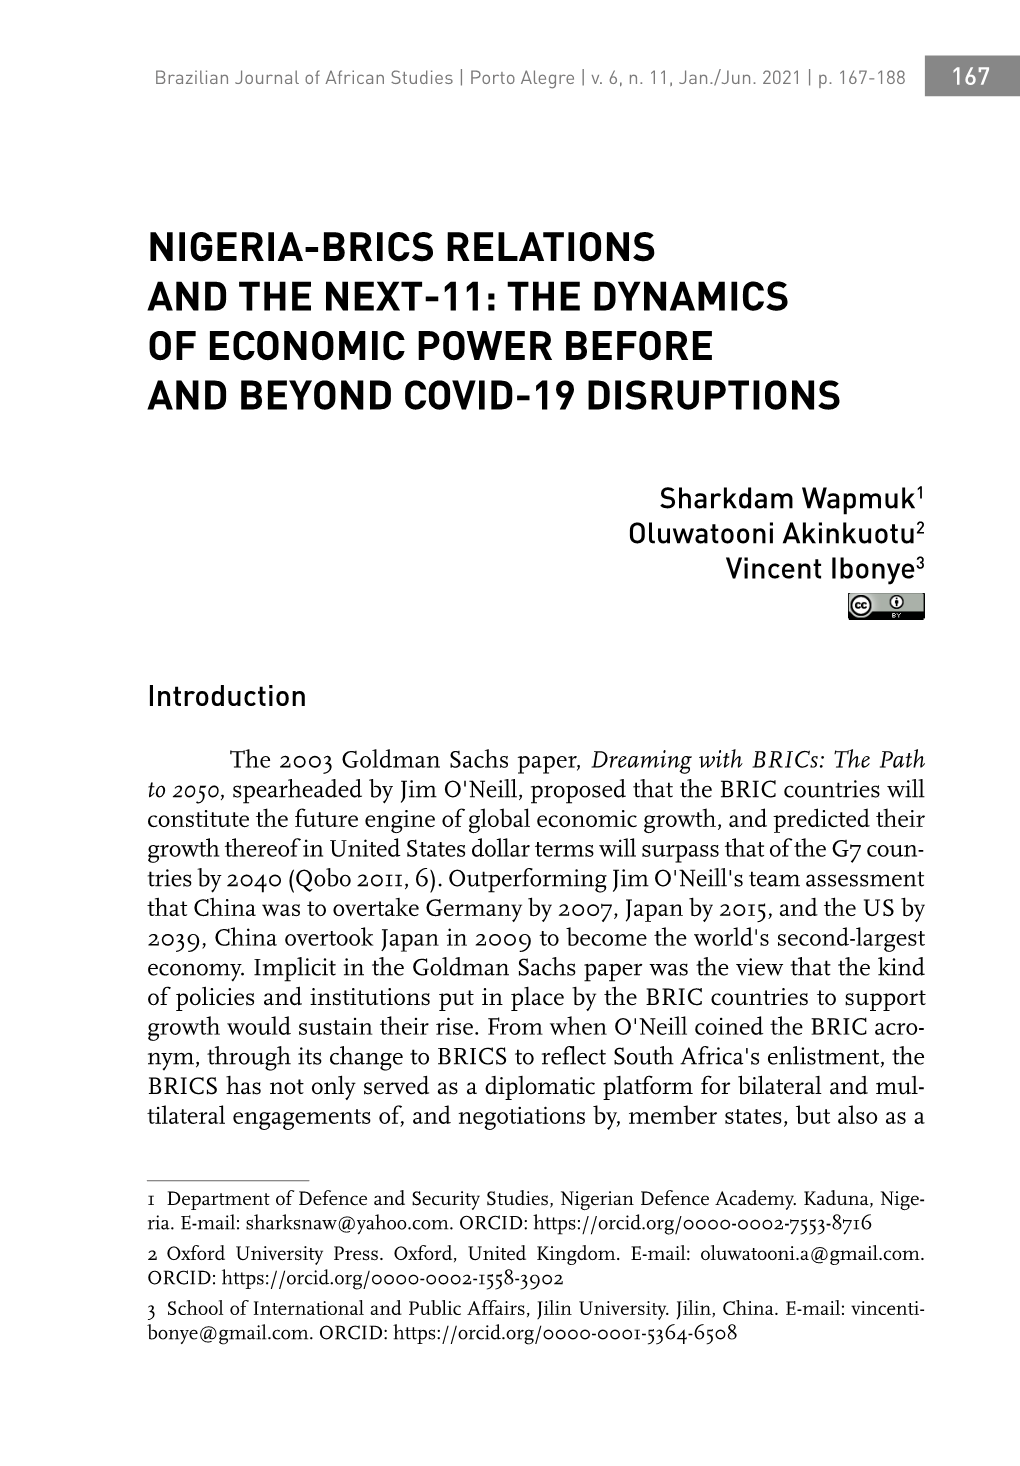 Nigeria-Brics Relations and the Next-11: the Dynamics of Economic Power Before and Beyond Covid-19 Disruptions